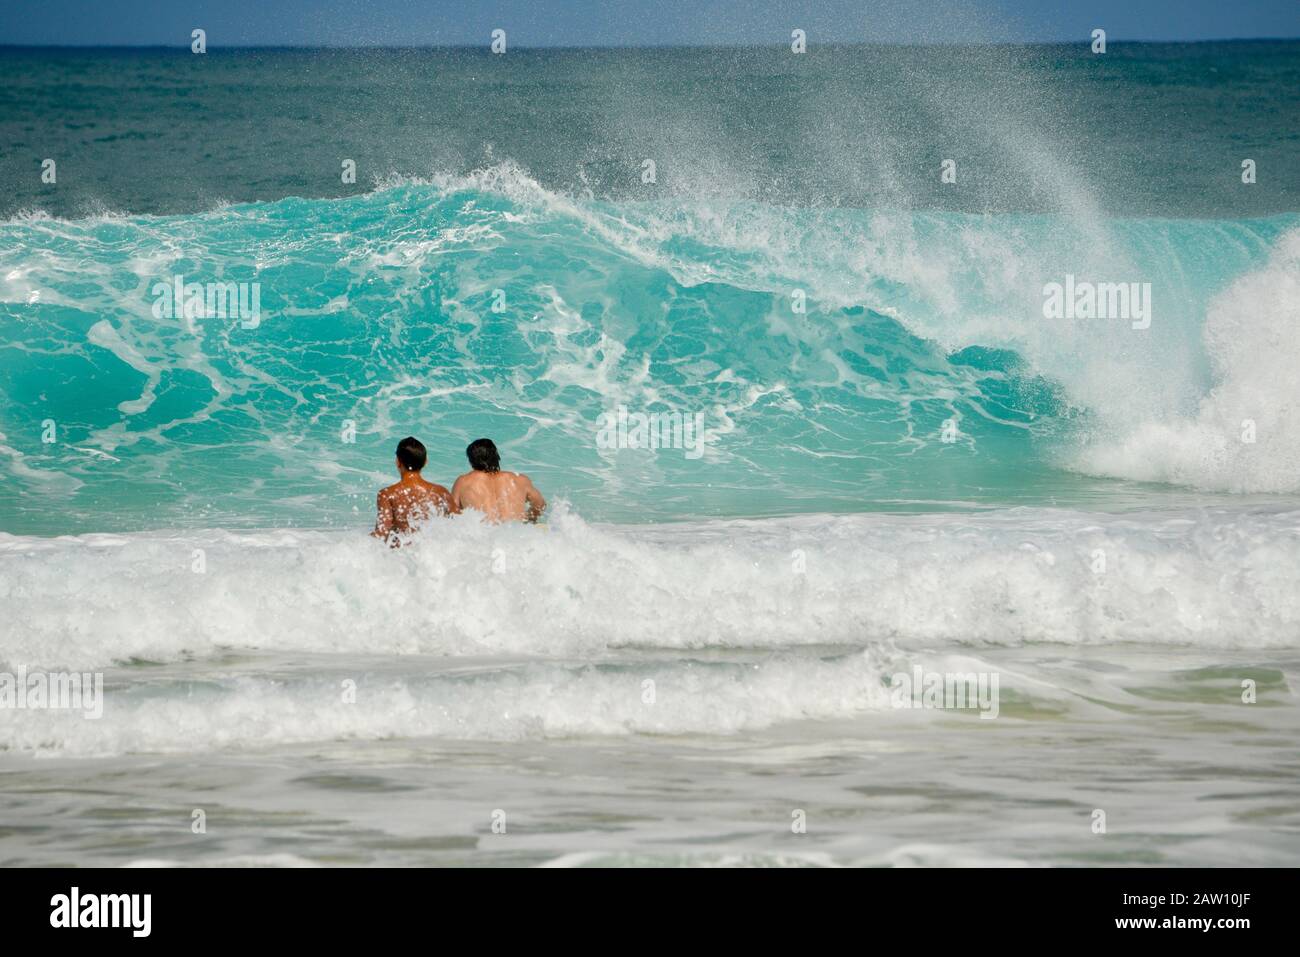 Surfers padding out to world-renowned crashing, barreling curved turquoise  waves in Banzai Pipeline on North Shore, Oahu island, Haleiwa, Hawaii, USA  Stock Photo - Alamy